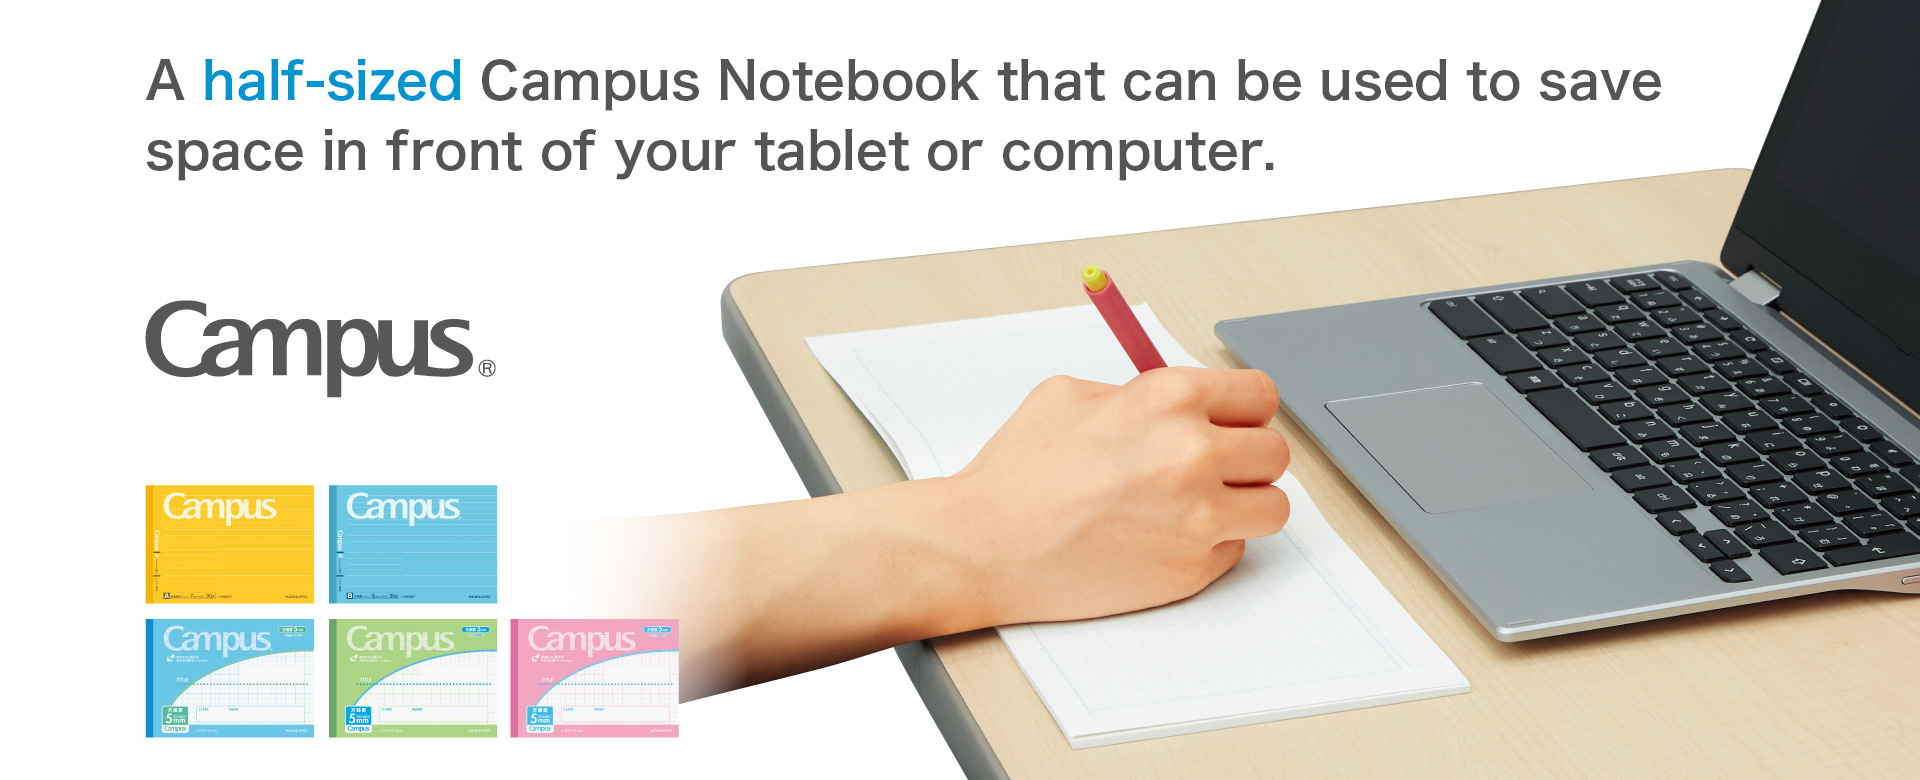 A half-sized Campus Notebook that can be used to save space in front of a tablet or computer.